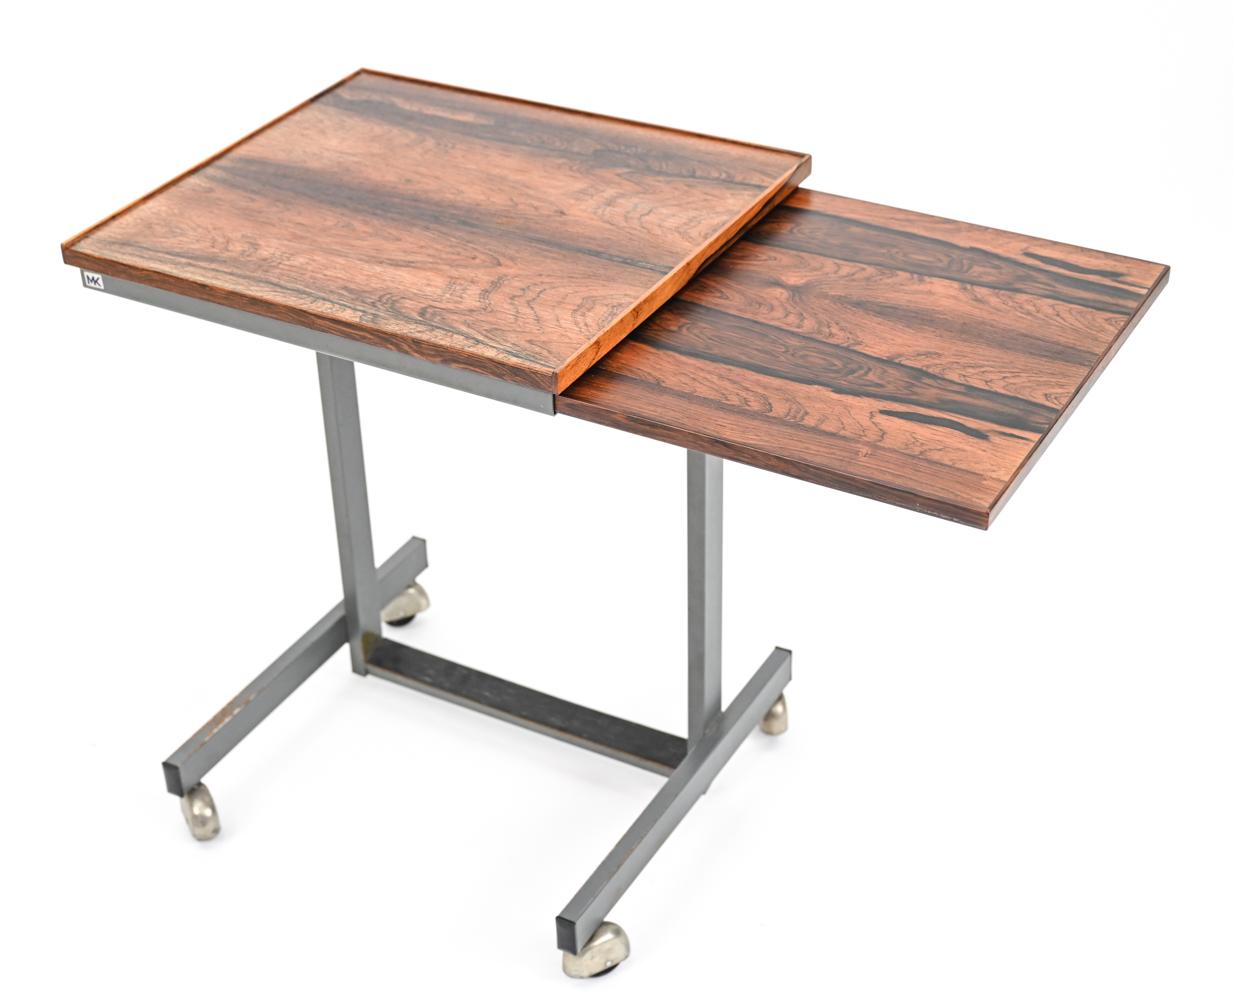 An unusual Danish mid-century child's-scale diminutive desk featuring a fine rosewood top with pull-out writing surface and metal base on casters. With MK label to side edge underneath top. A charming piece for use in a child's room or for use as a